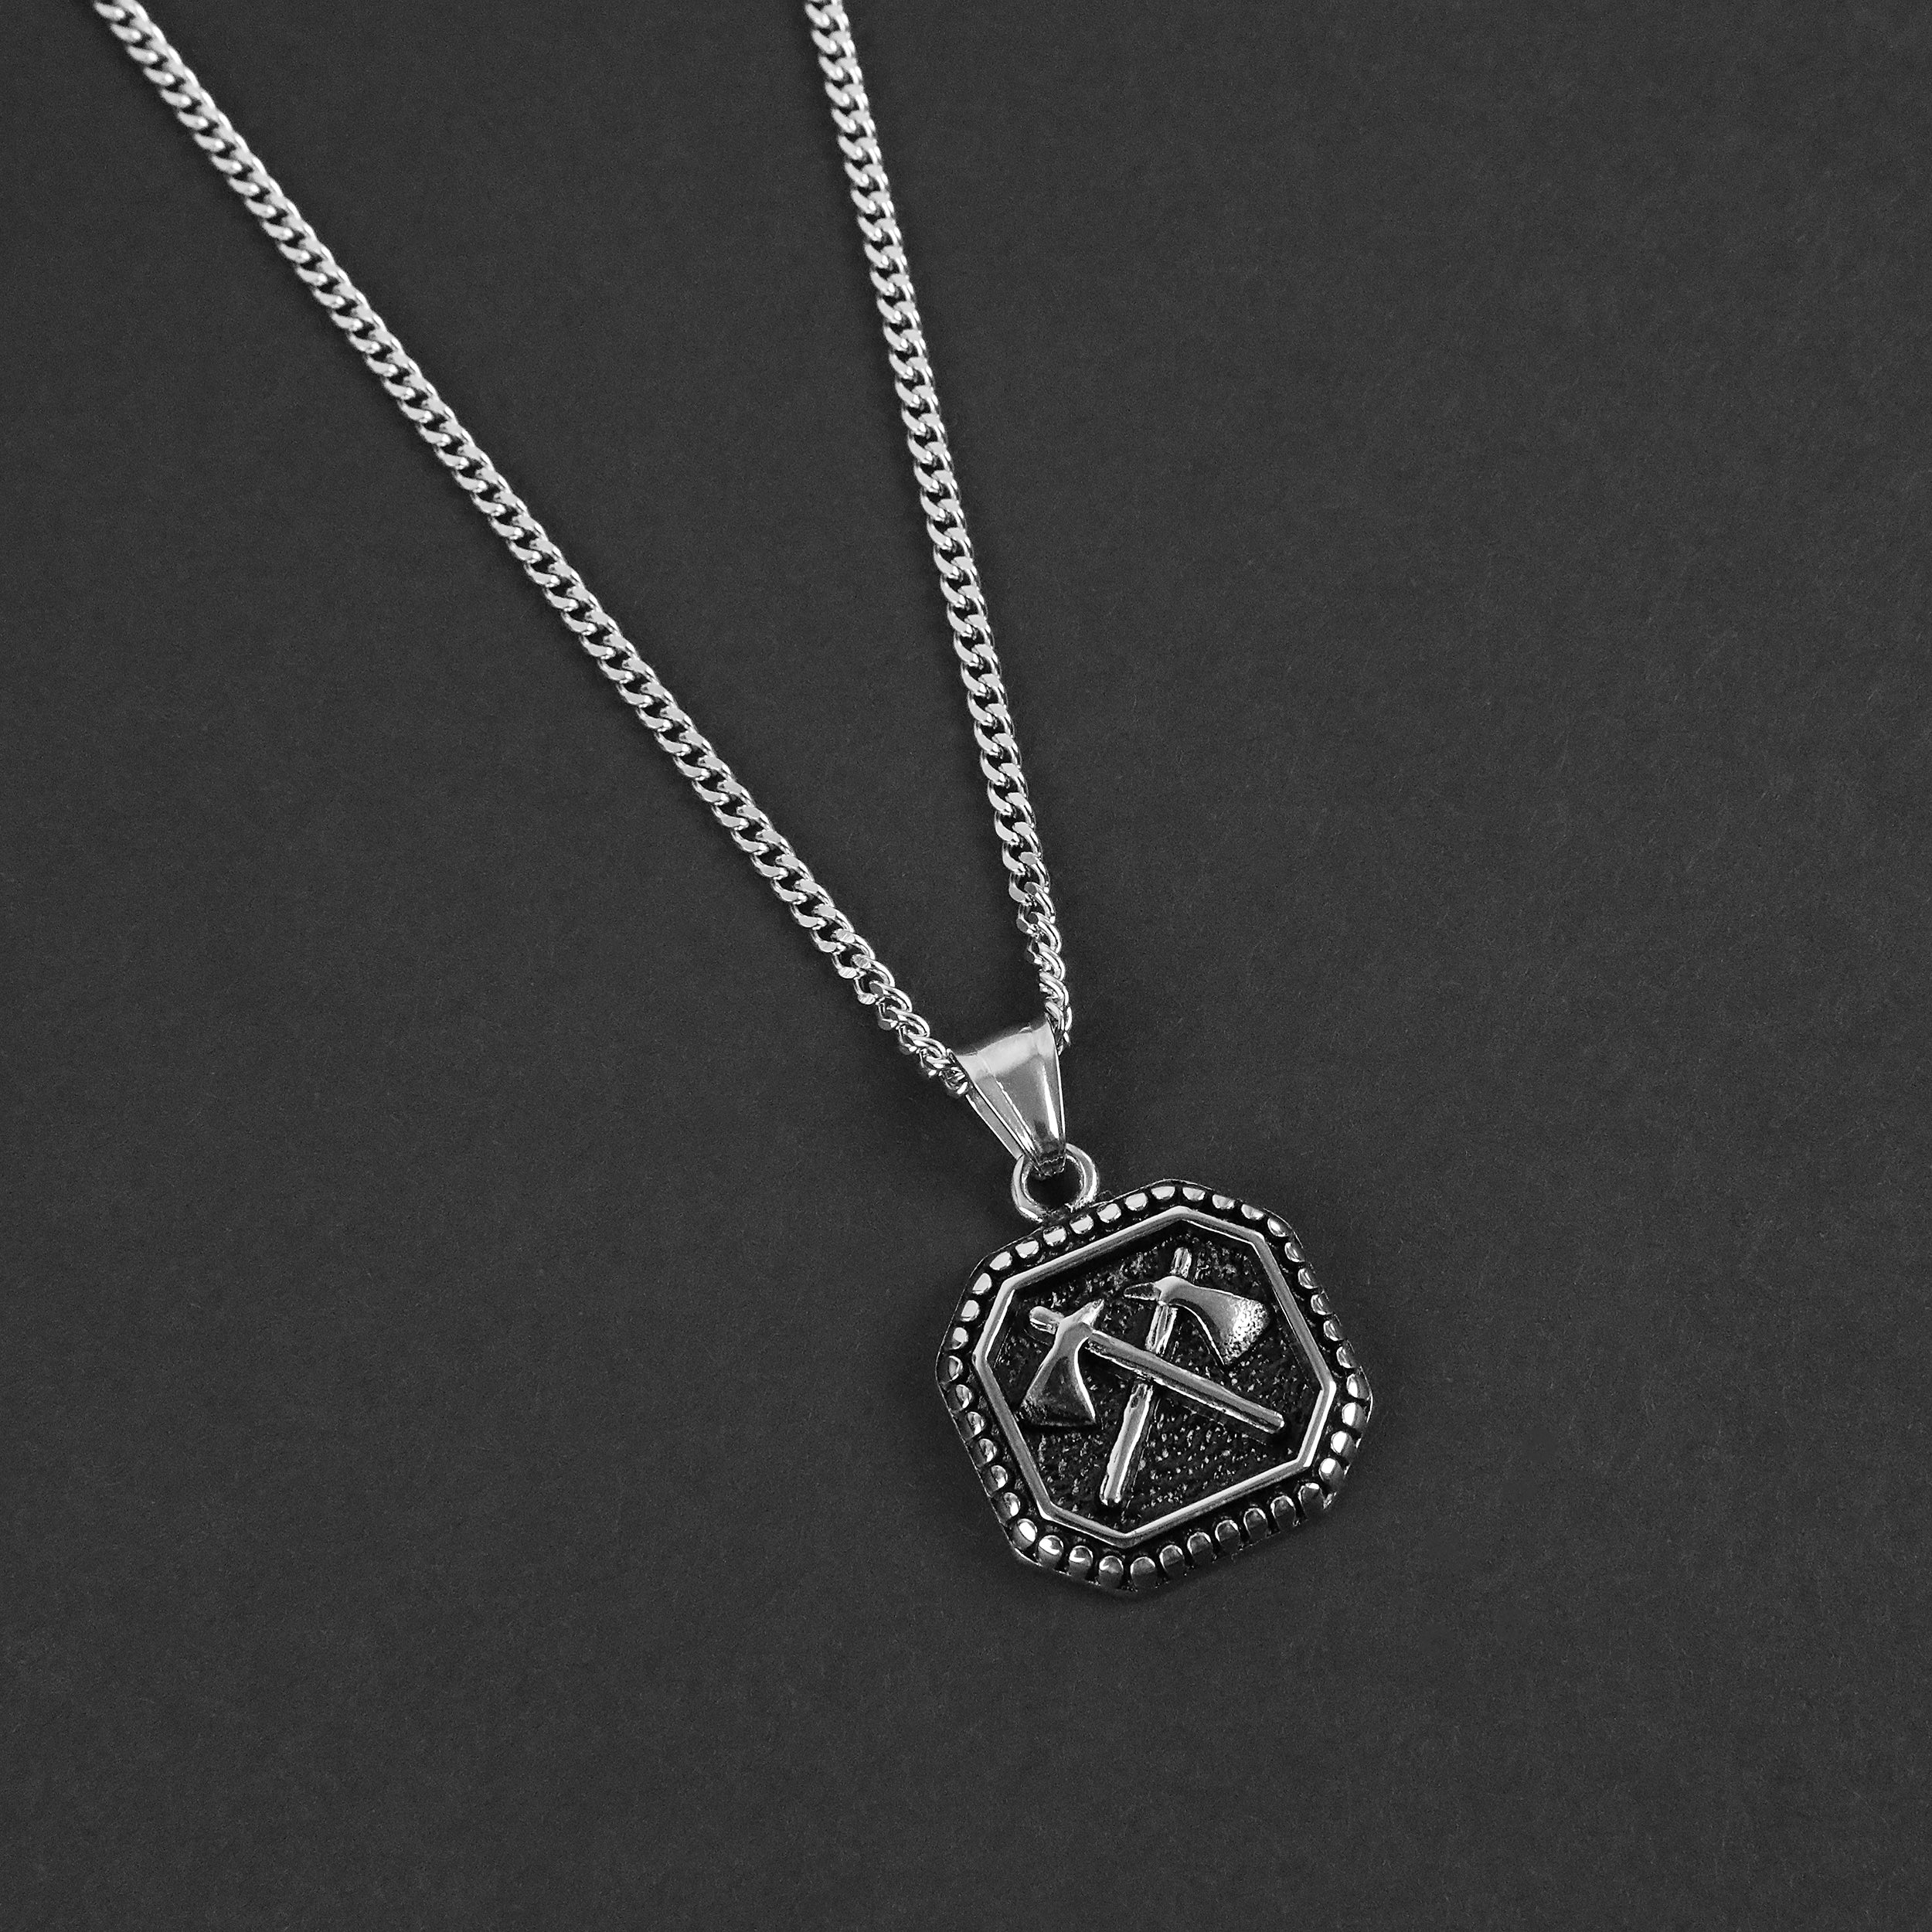 Crossed Axes Necklace - Silver x Black